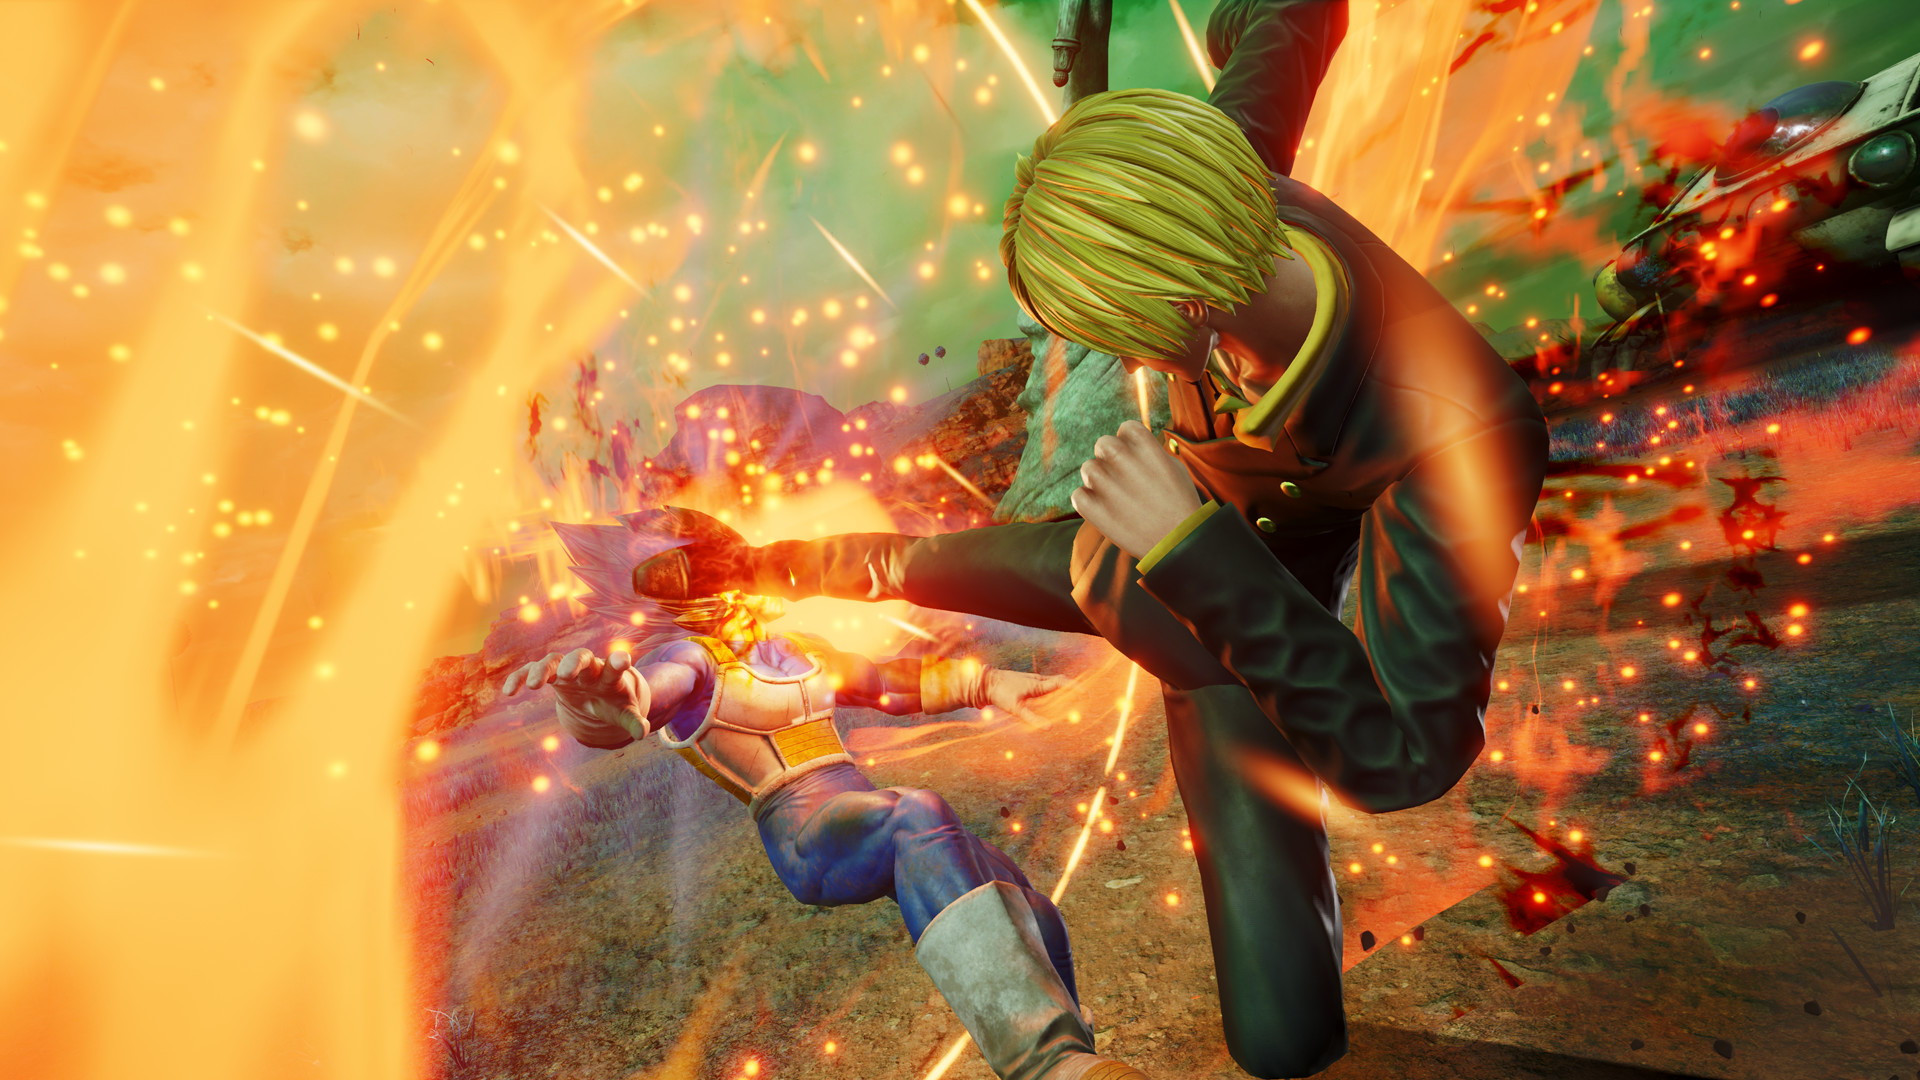 jump force download pc windows 10